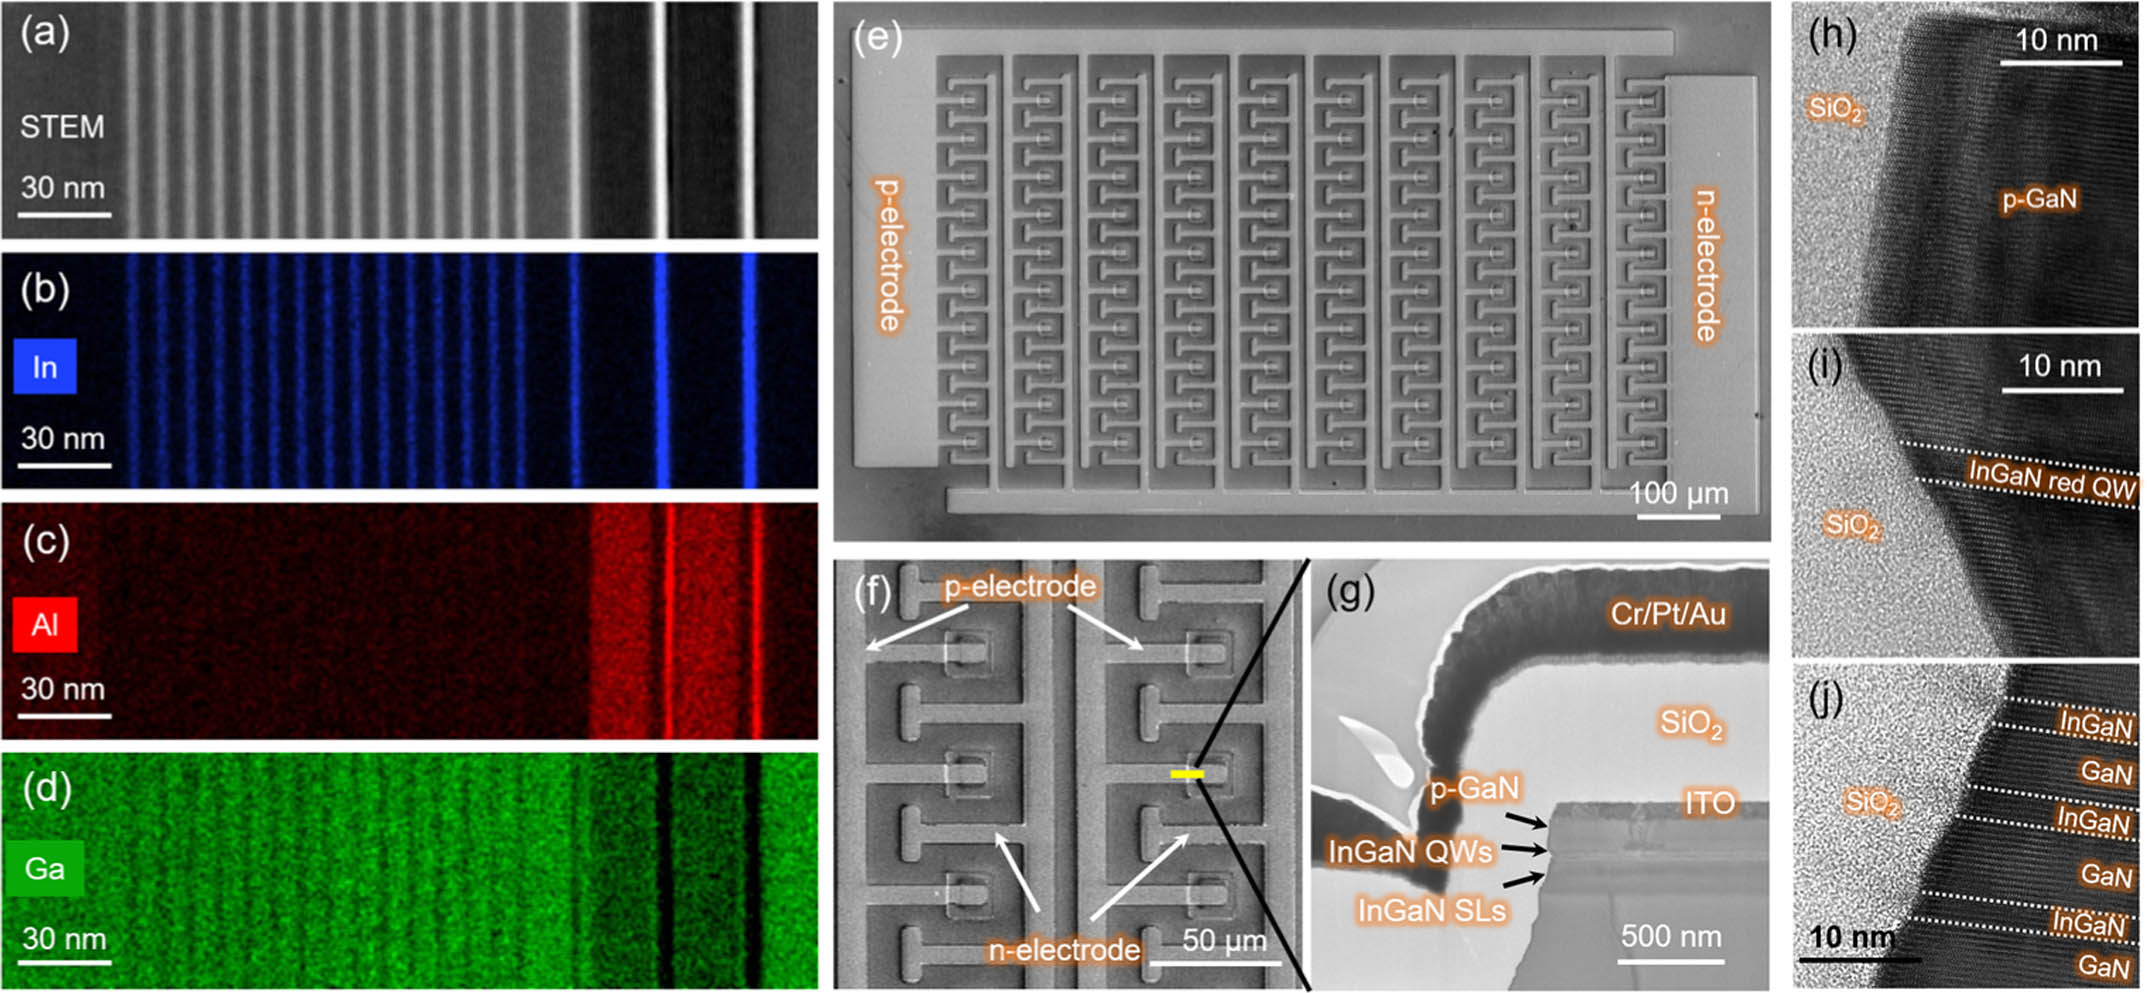 (a) Cross-sectional scanning transmission electron microscopy (STEM) image of our InGaN red LED structures. (b)–(d) Energy-dispersive X-ray spectroscopy (EDS) elemental mappings of In, Al, and Ga atoms distributed in the InGaN QWs and SLs using STEM EDS measurements. (e) Top-view and (f) high-resolution scanning electron microscopy (SEM) images for the red μLED array. (g) Cross-sectional TEM image of the single μLED device. (h)–(j) Cross-sectional high-resolution TEM (HRTEM) images for the interfaces between nitride materials and SiO2.